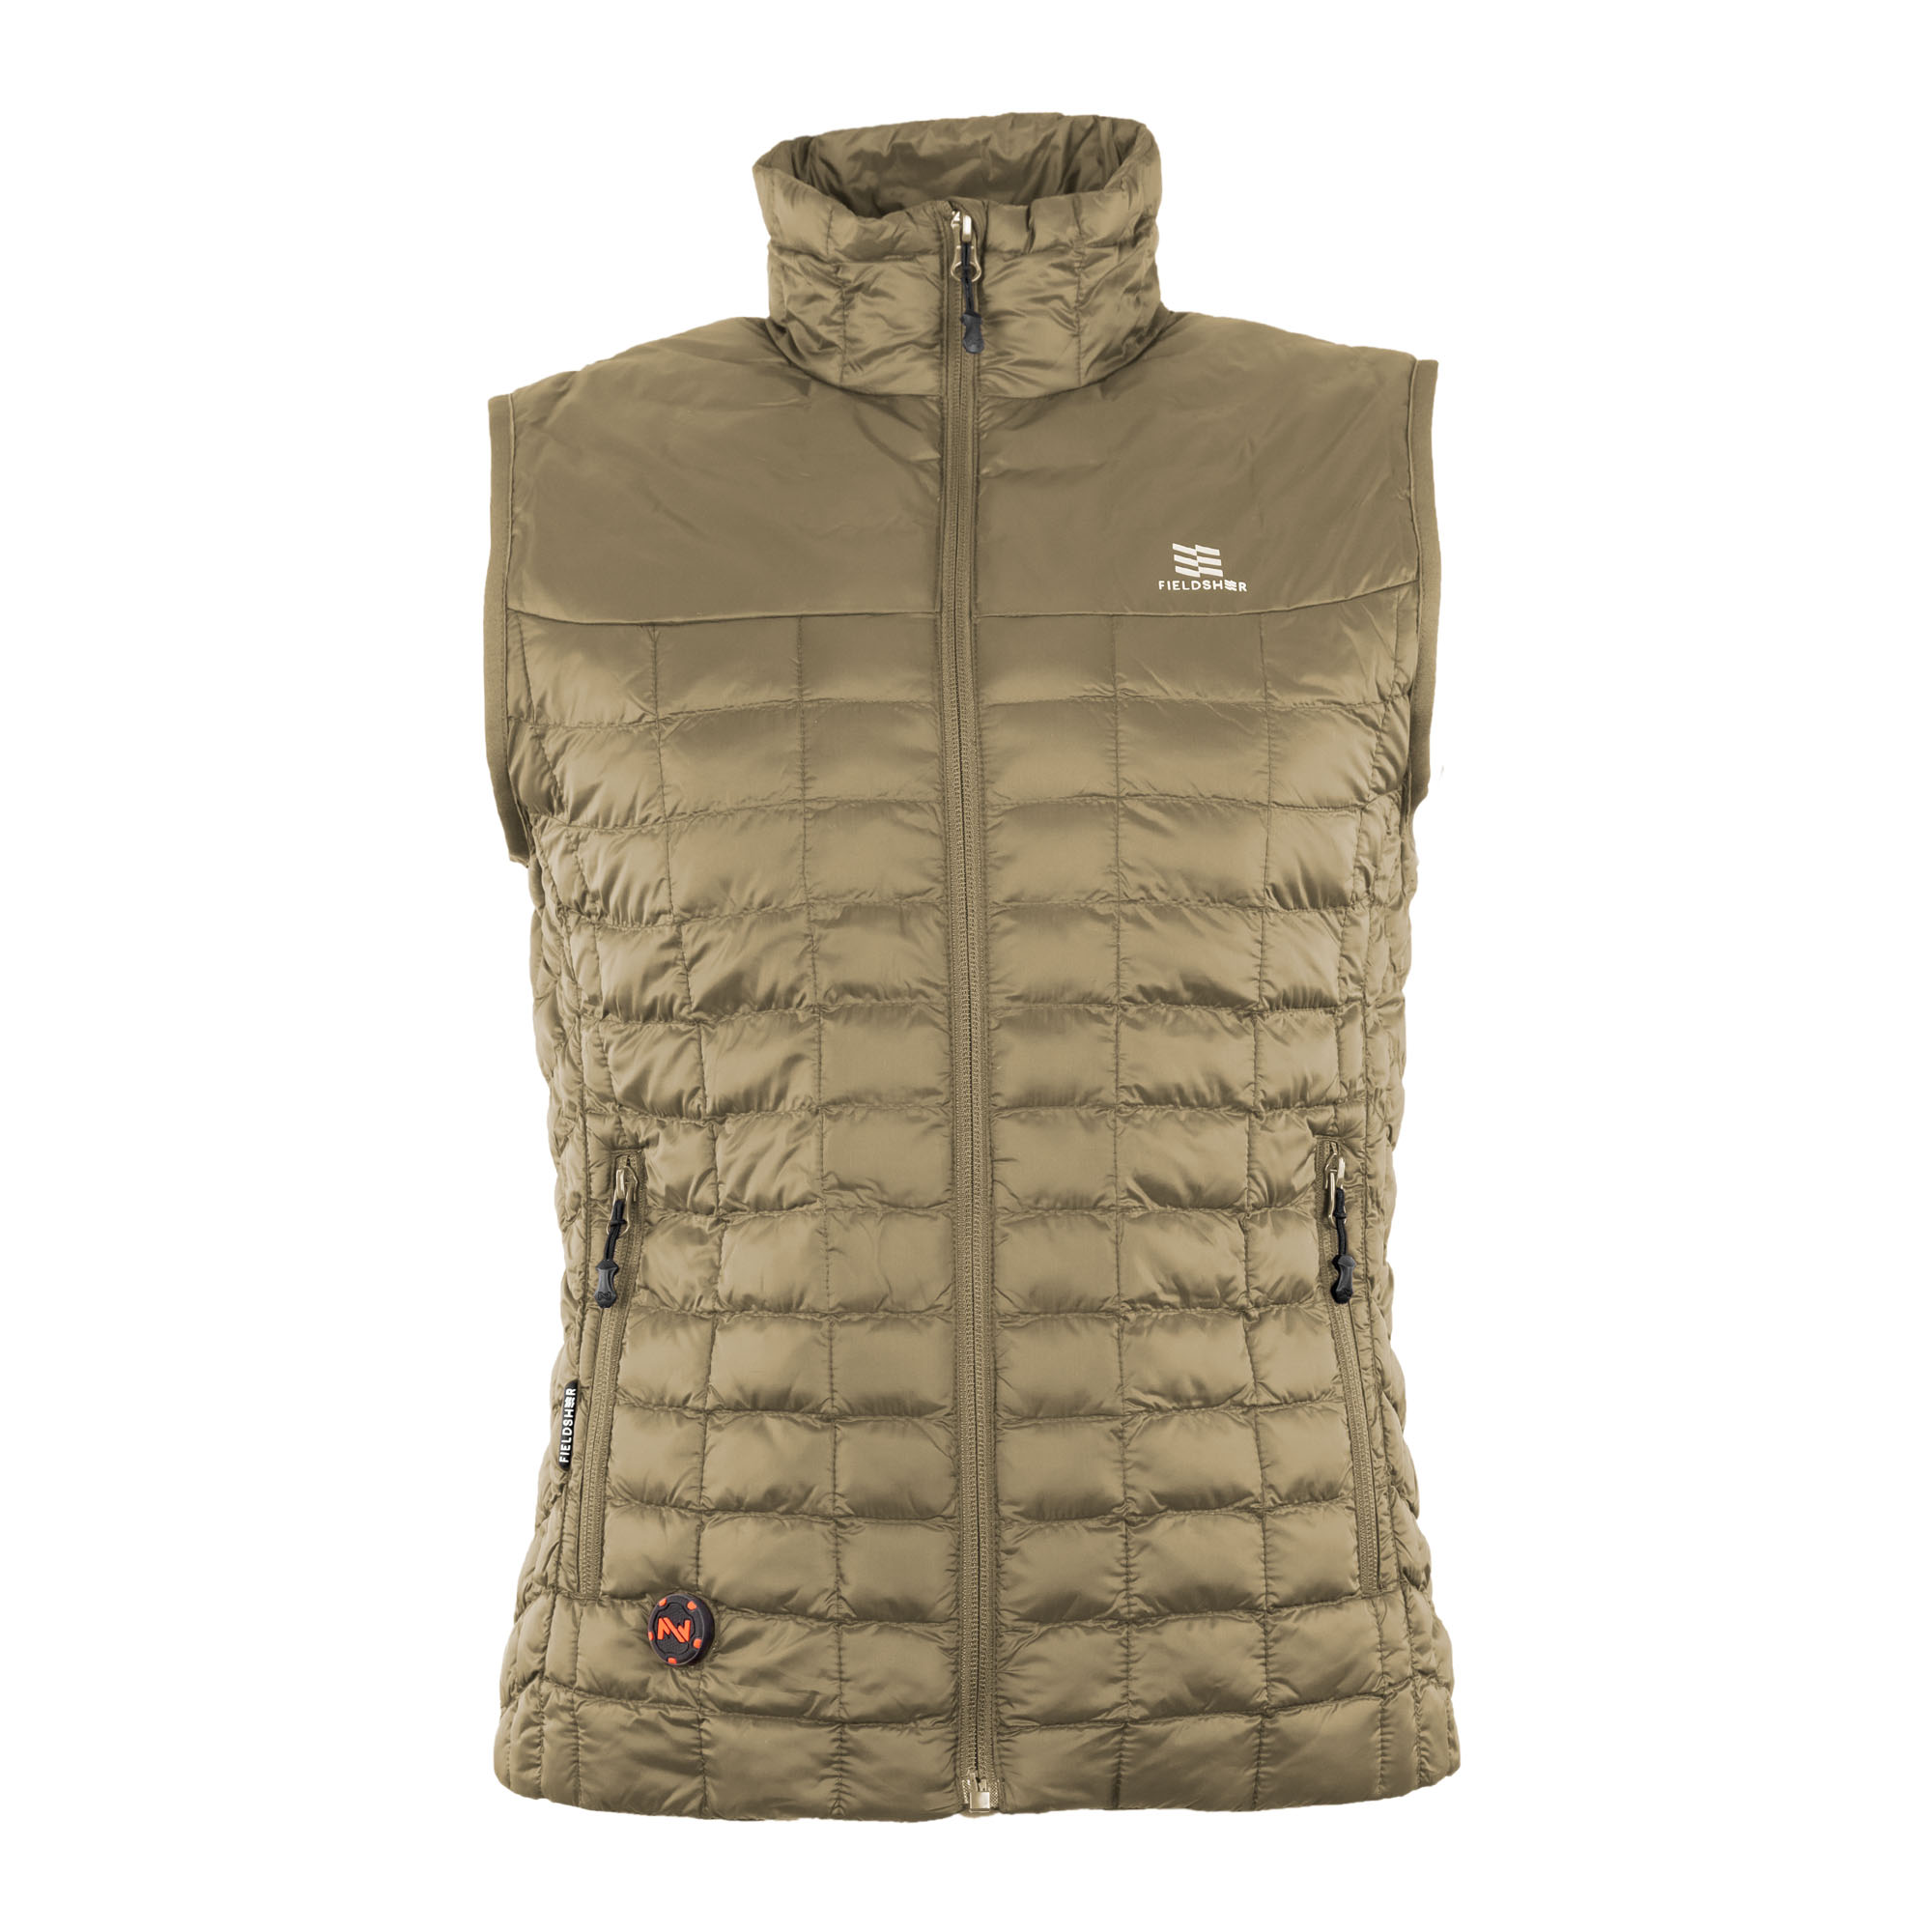 Mobile Warming 7.4V Heated Back Country Vest - Womens